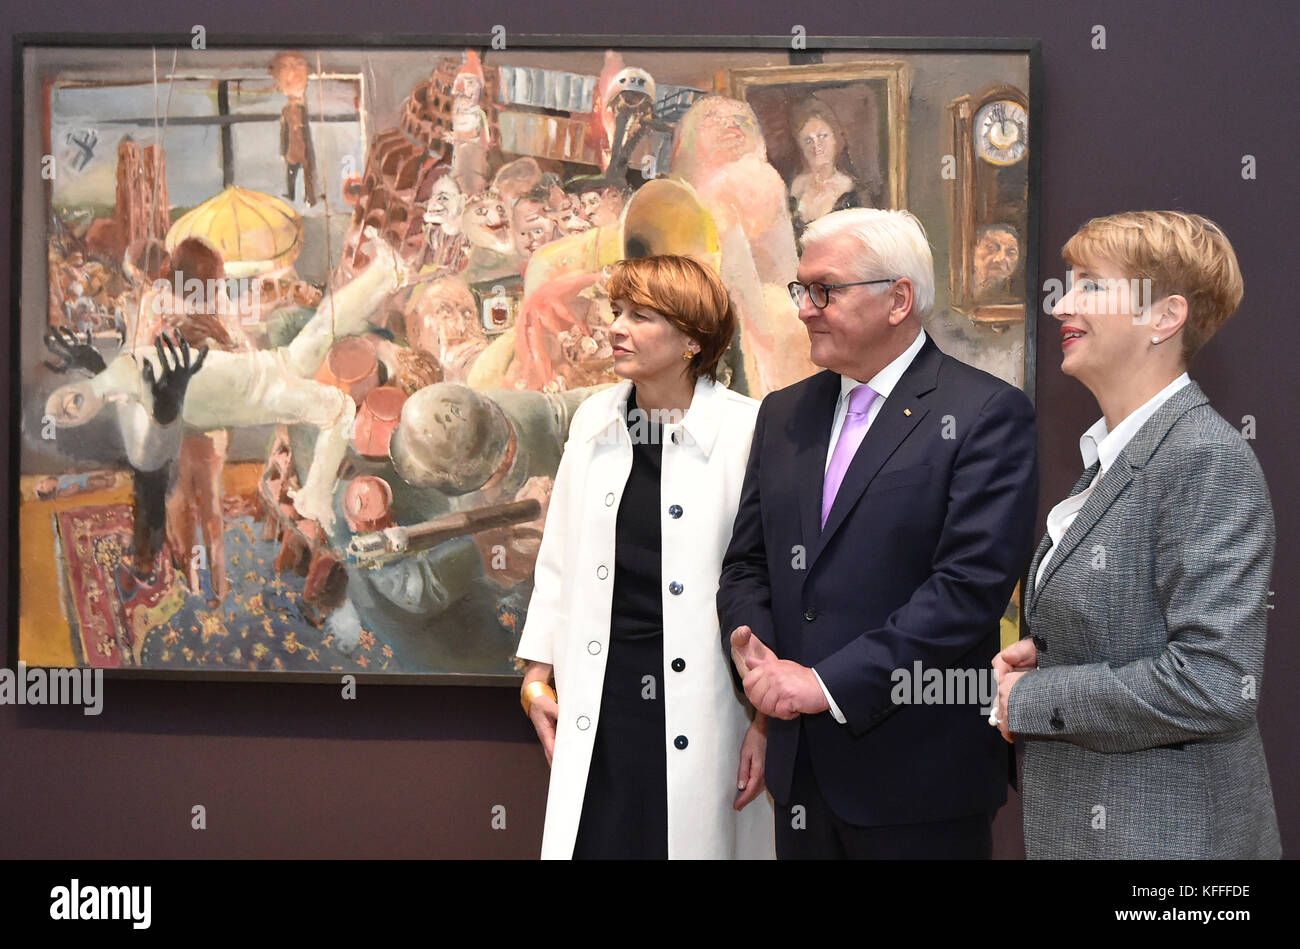 German president Frank Walter Steinmeier, his wife Elke Büdenbender (C) and museum direcotr Ortrud Westheider walk past a painting by Bernhard Heisig displayed at the 'Behind the Mask: Artists in the GDR' exhibition in Potsdam, Germany, 28 October 2017. The exhibition takes a look at the self-portrayal of artists in the GDR. Photo: Bernd Settnik/dpa Stock Photo